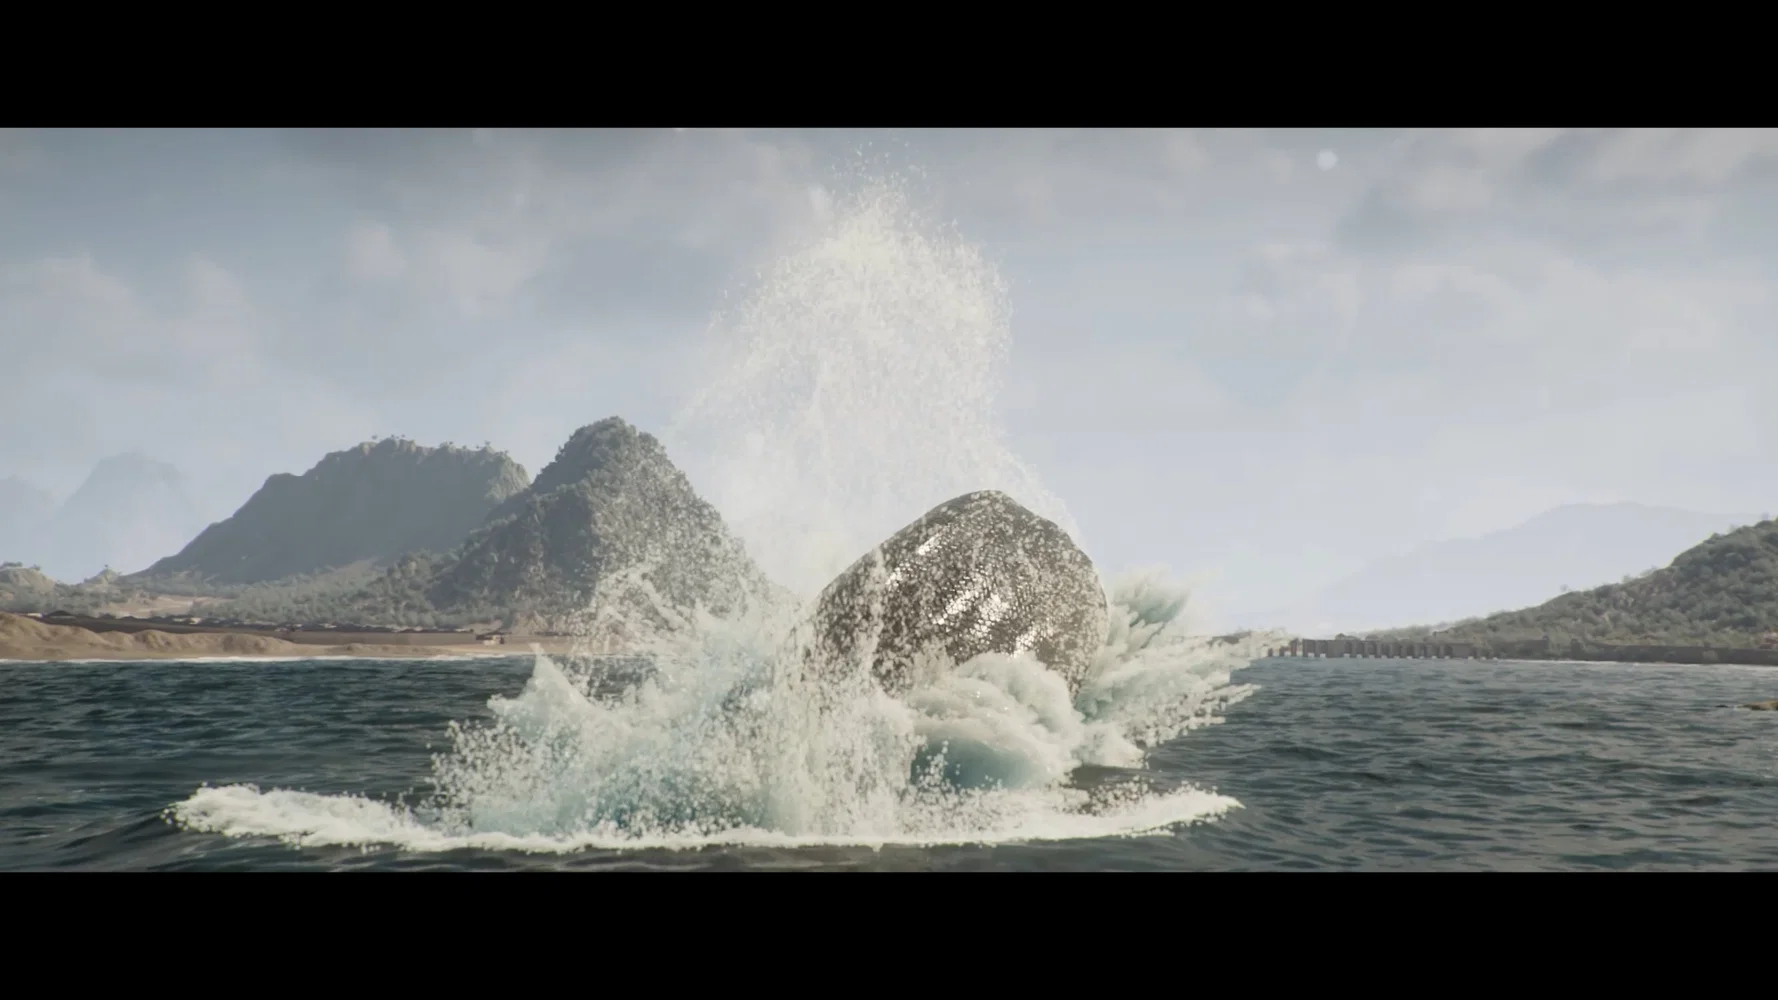 Responsible for the Environment and Water FLIP simulations using Houdini and Nuke